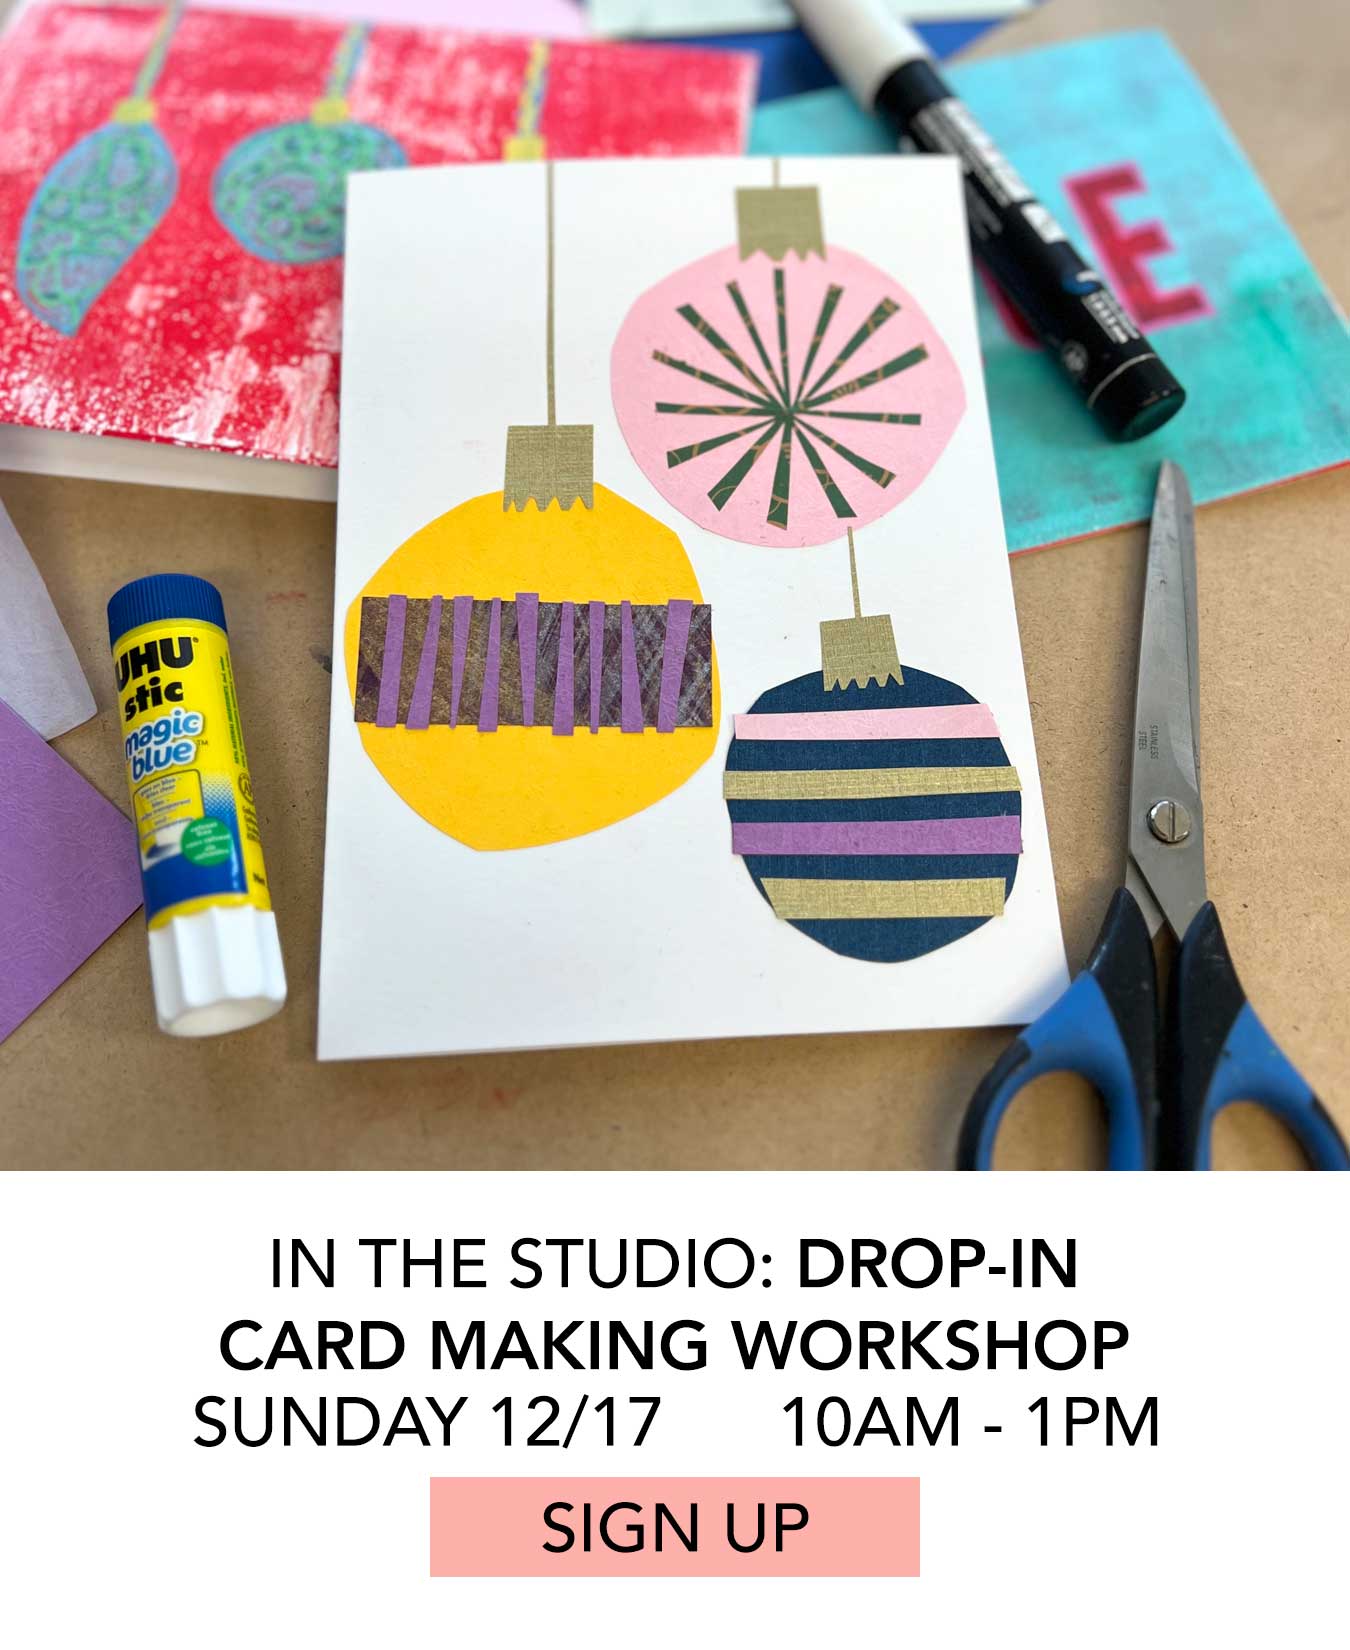 In the Studio: Drop-In Card Making Workshop. Sunday 12/17 from 10:00am to 1:00pm. Click to Sign Up.